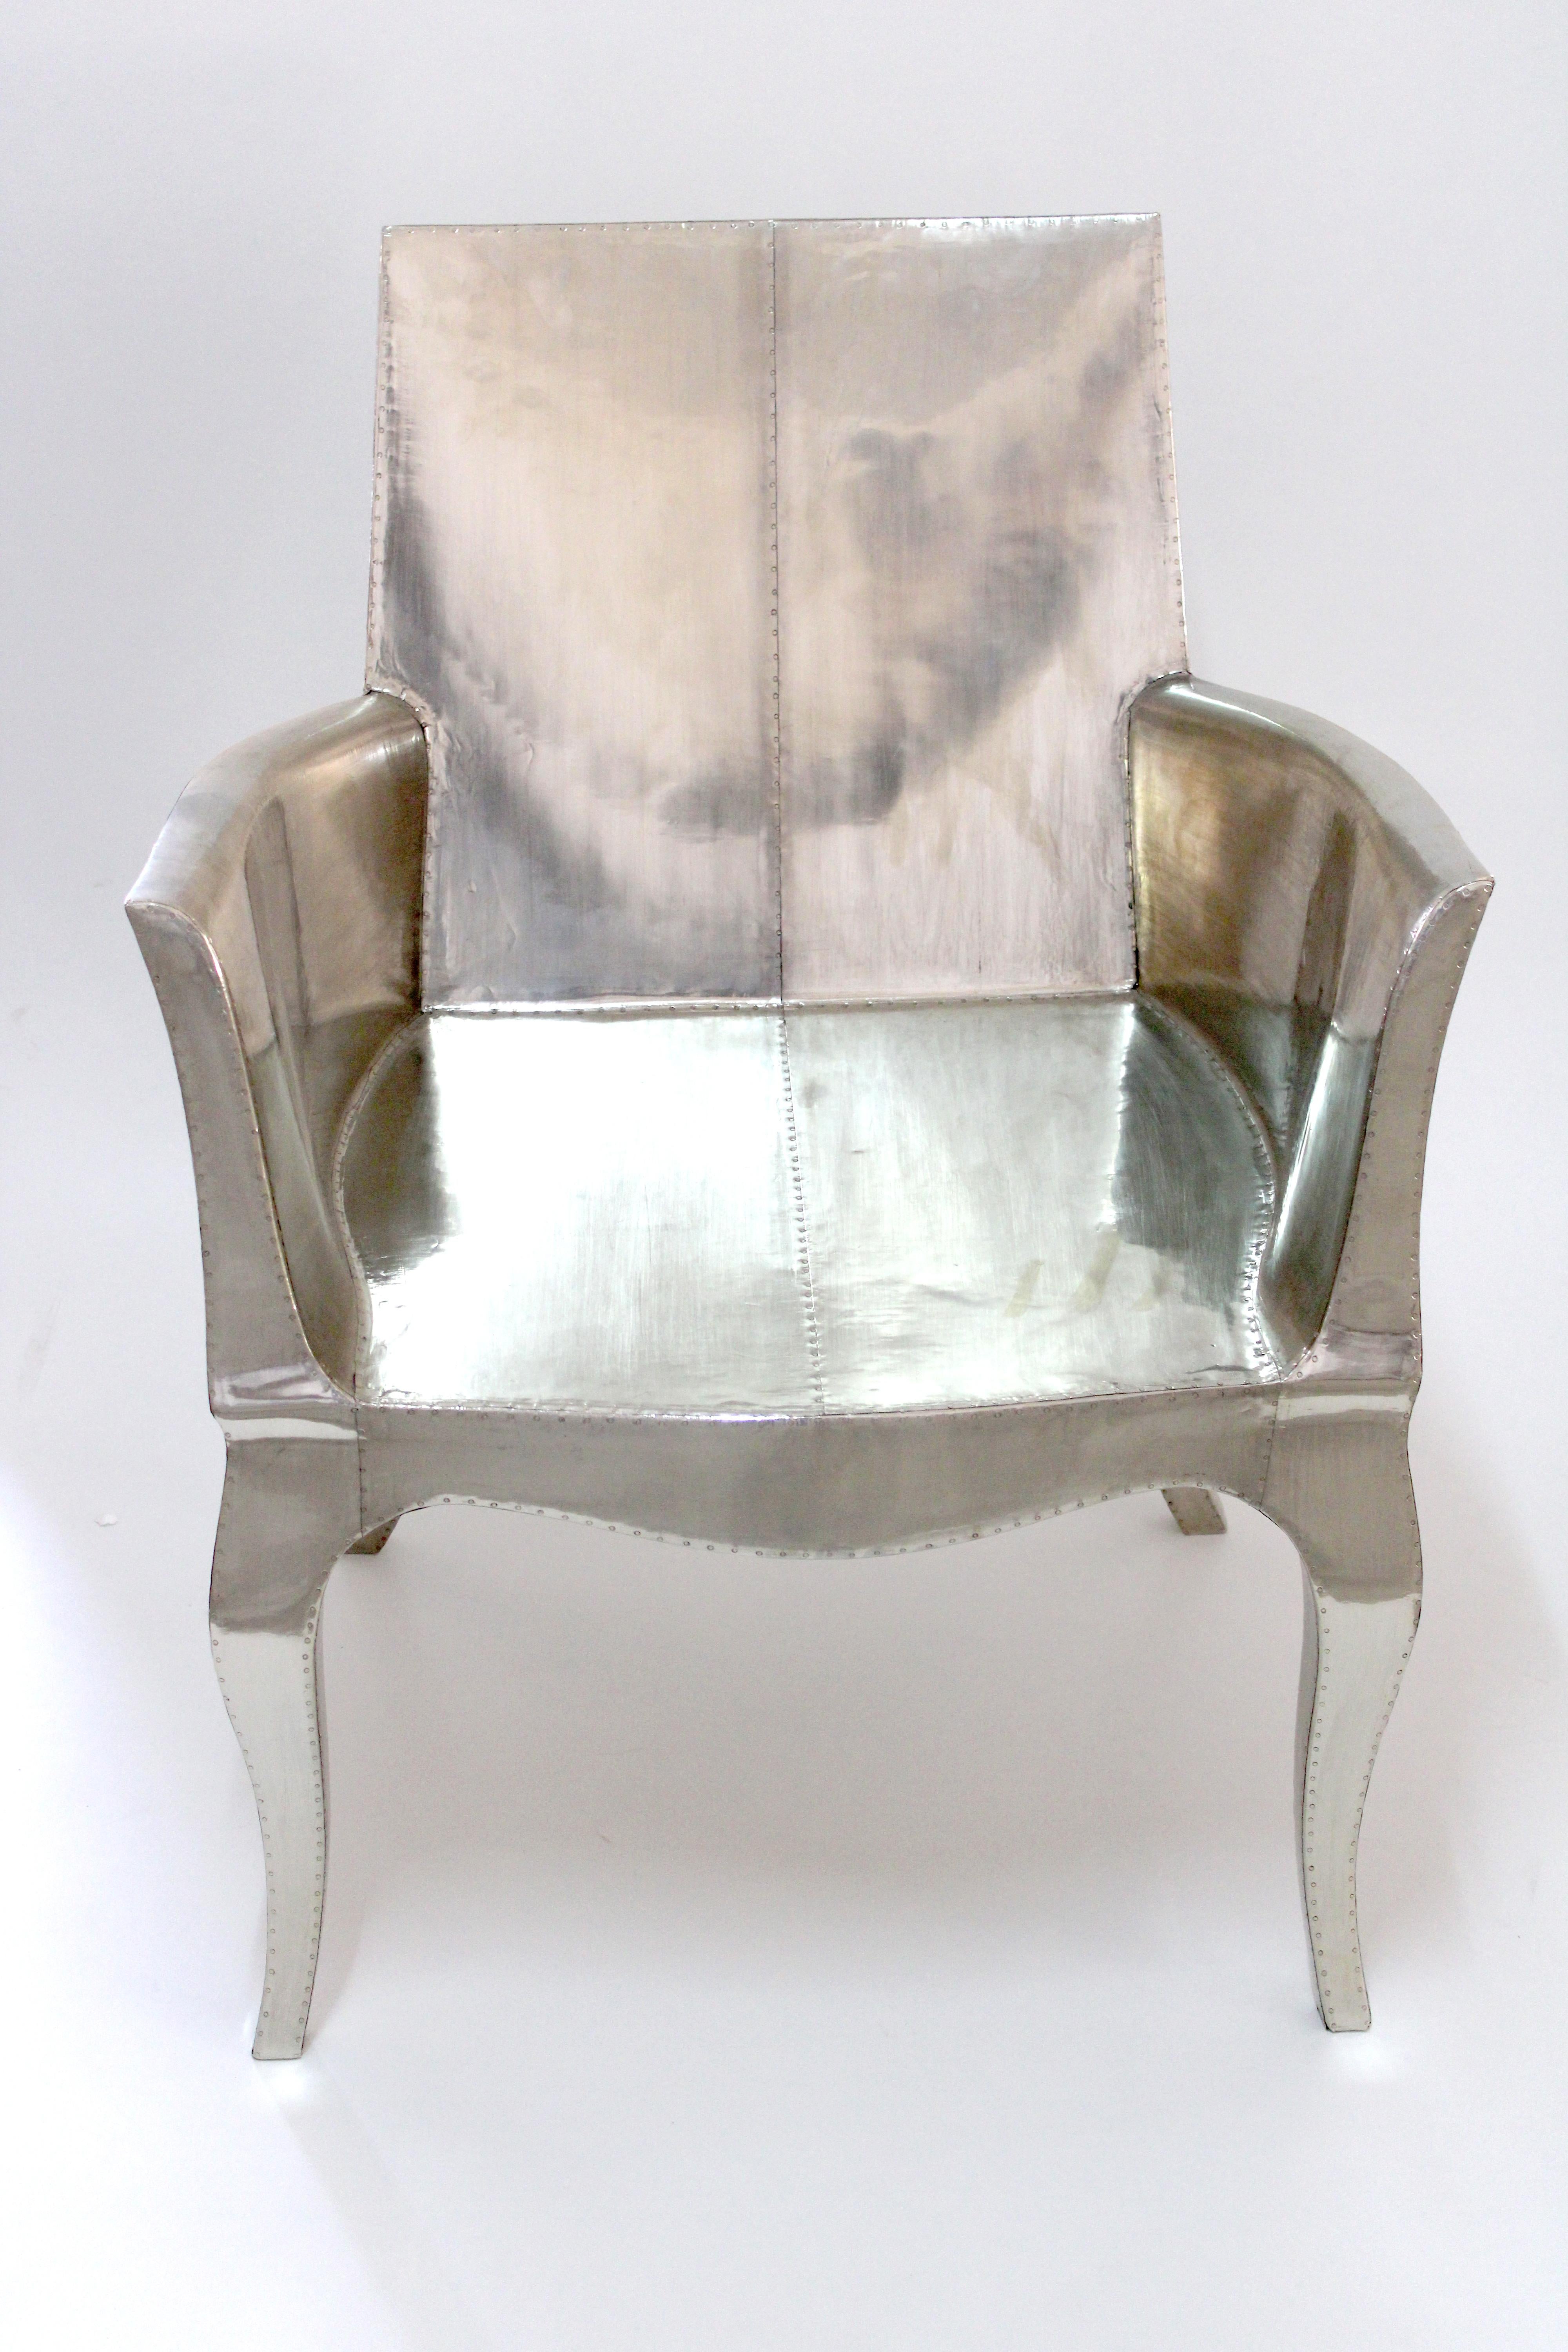 Contemporary Art Deco Dining Chairs Pair Designed by Paul Mathieu for Stephanie Odegard For Sale